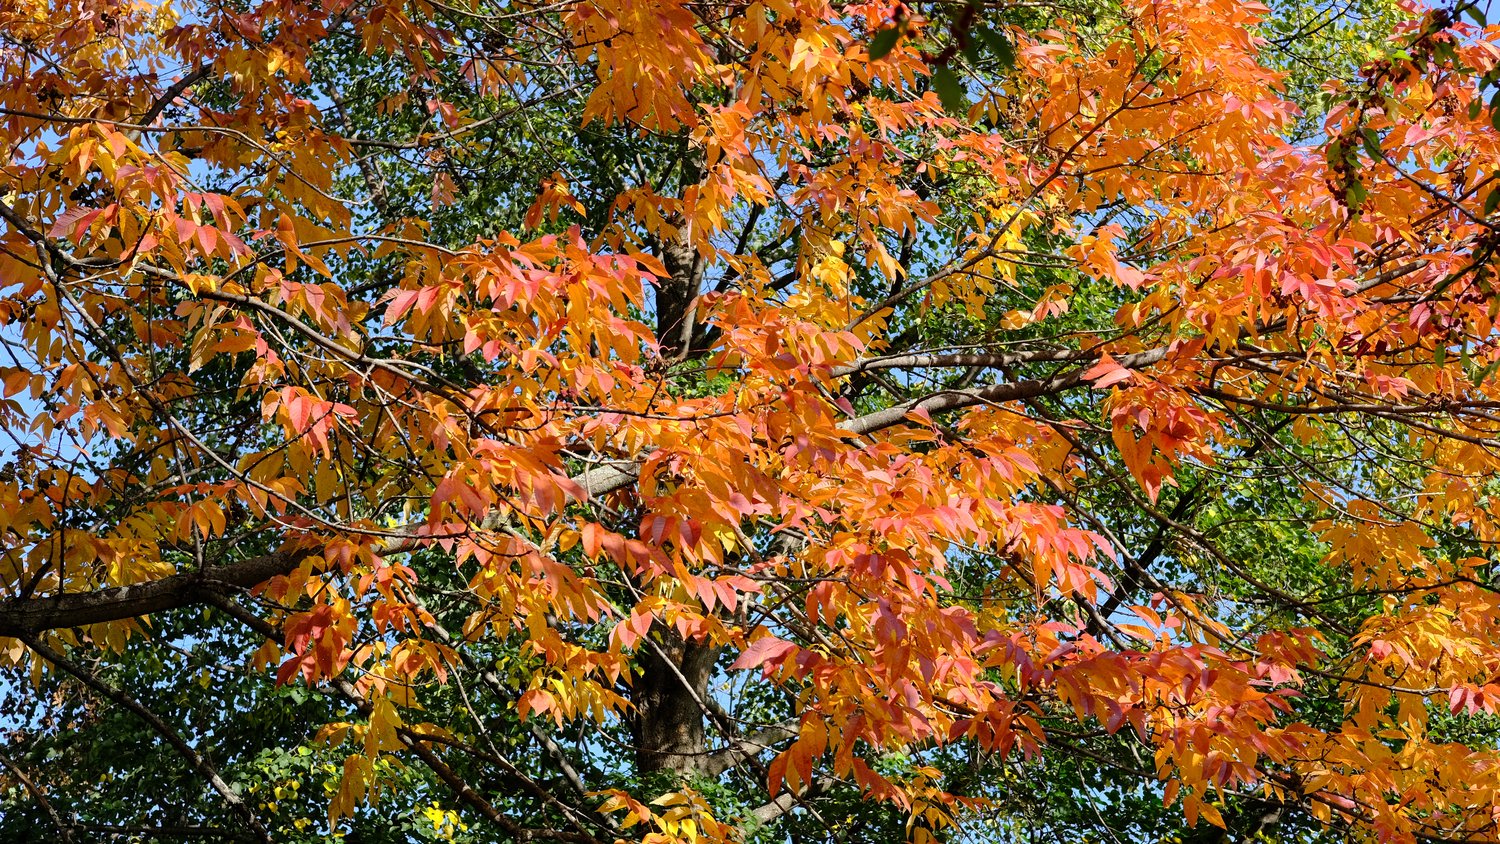 Orange and yellow leaves in the tree.